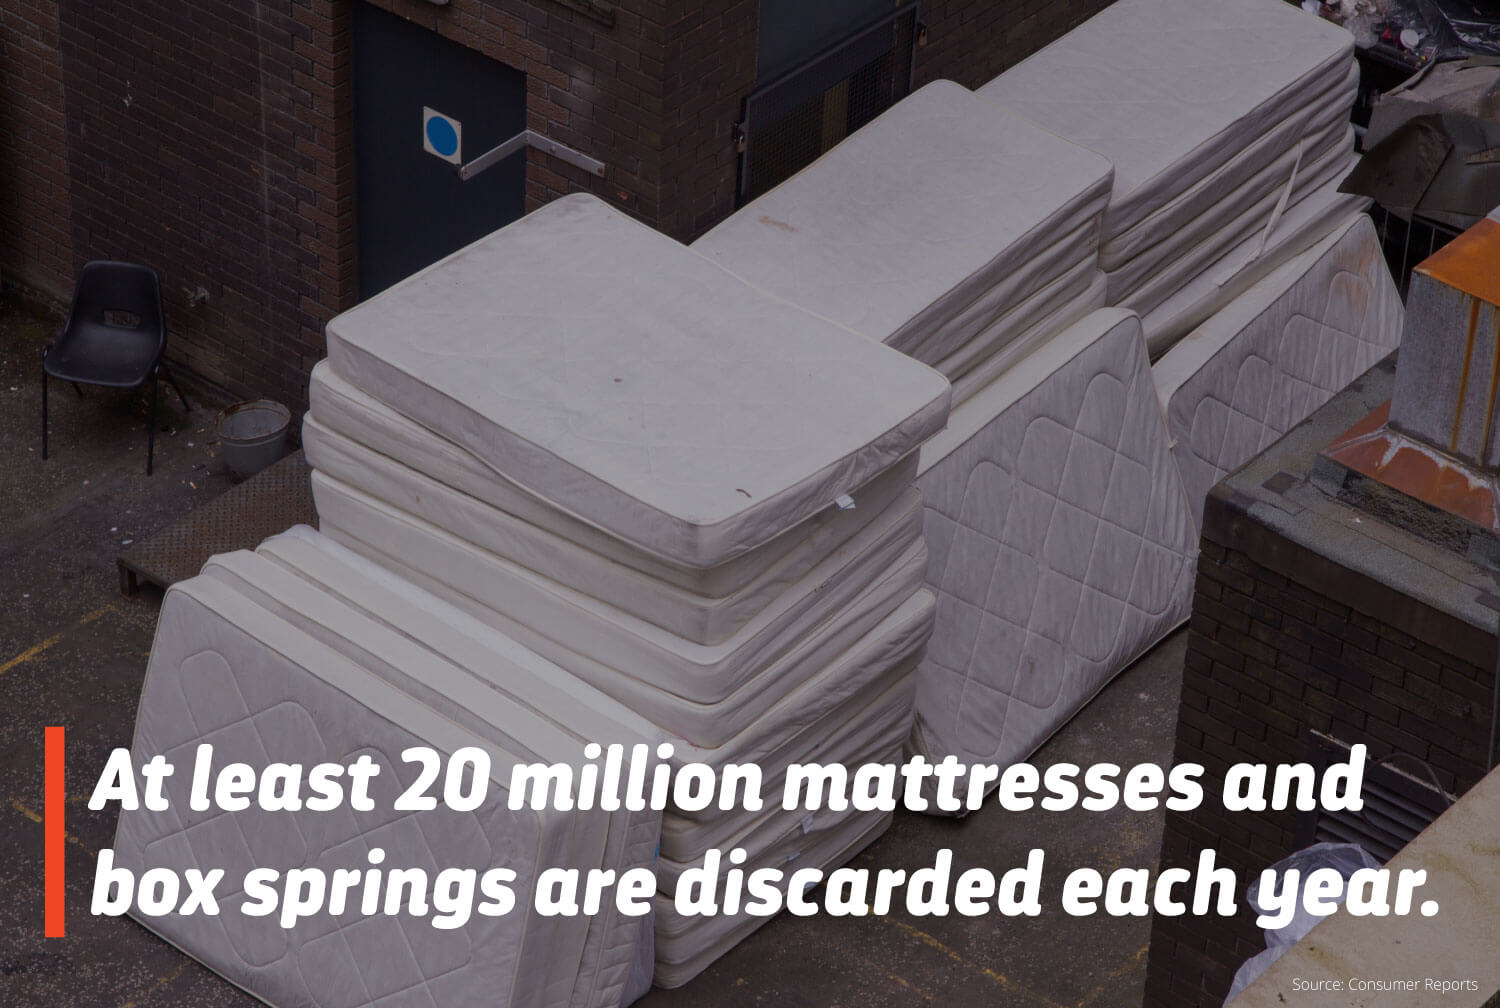 At least 20 million mattresses and box springs are discarded each year